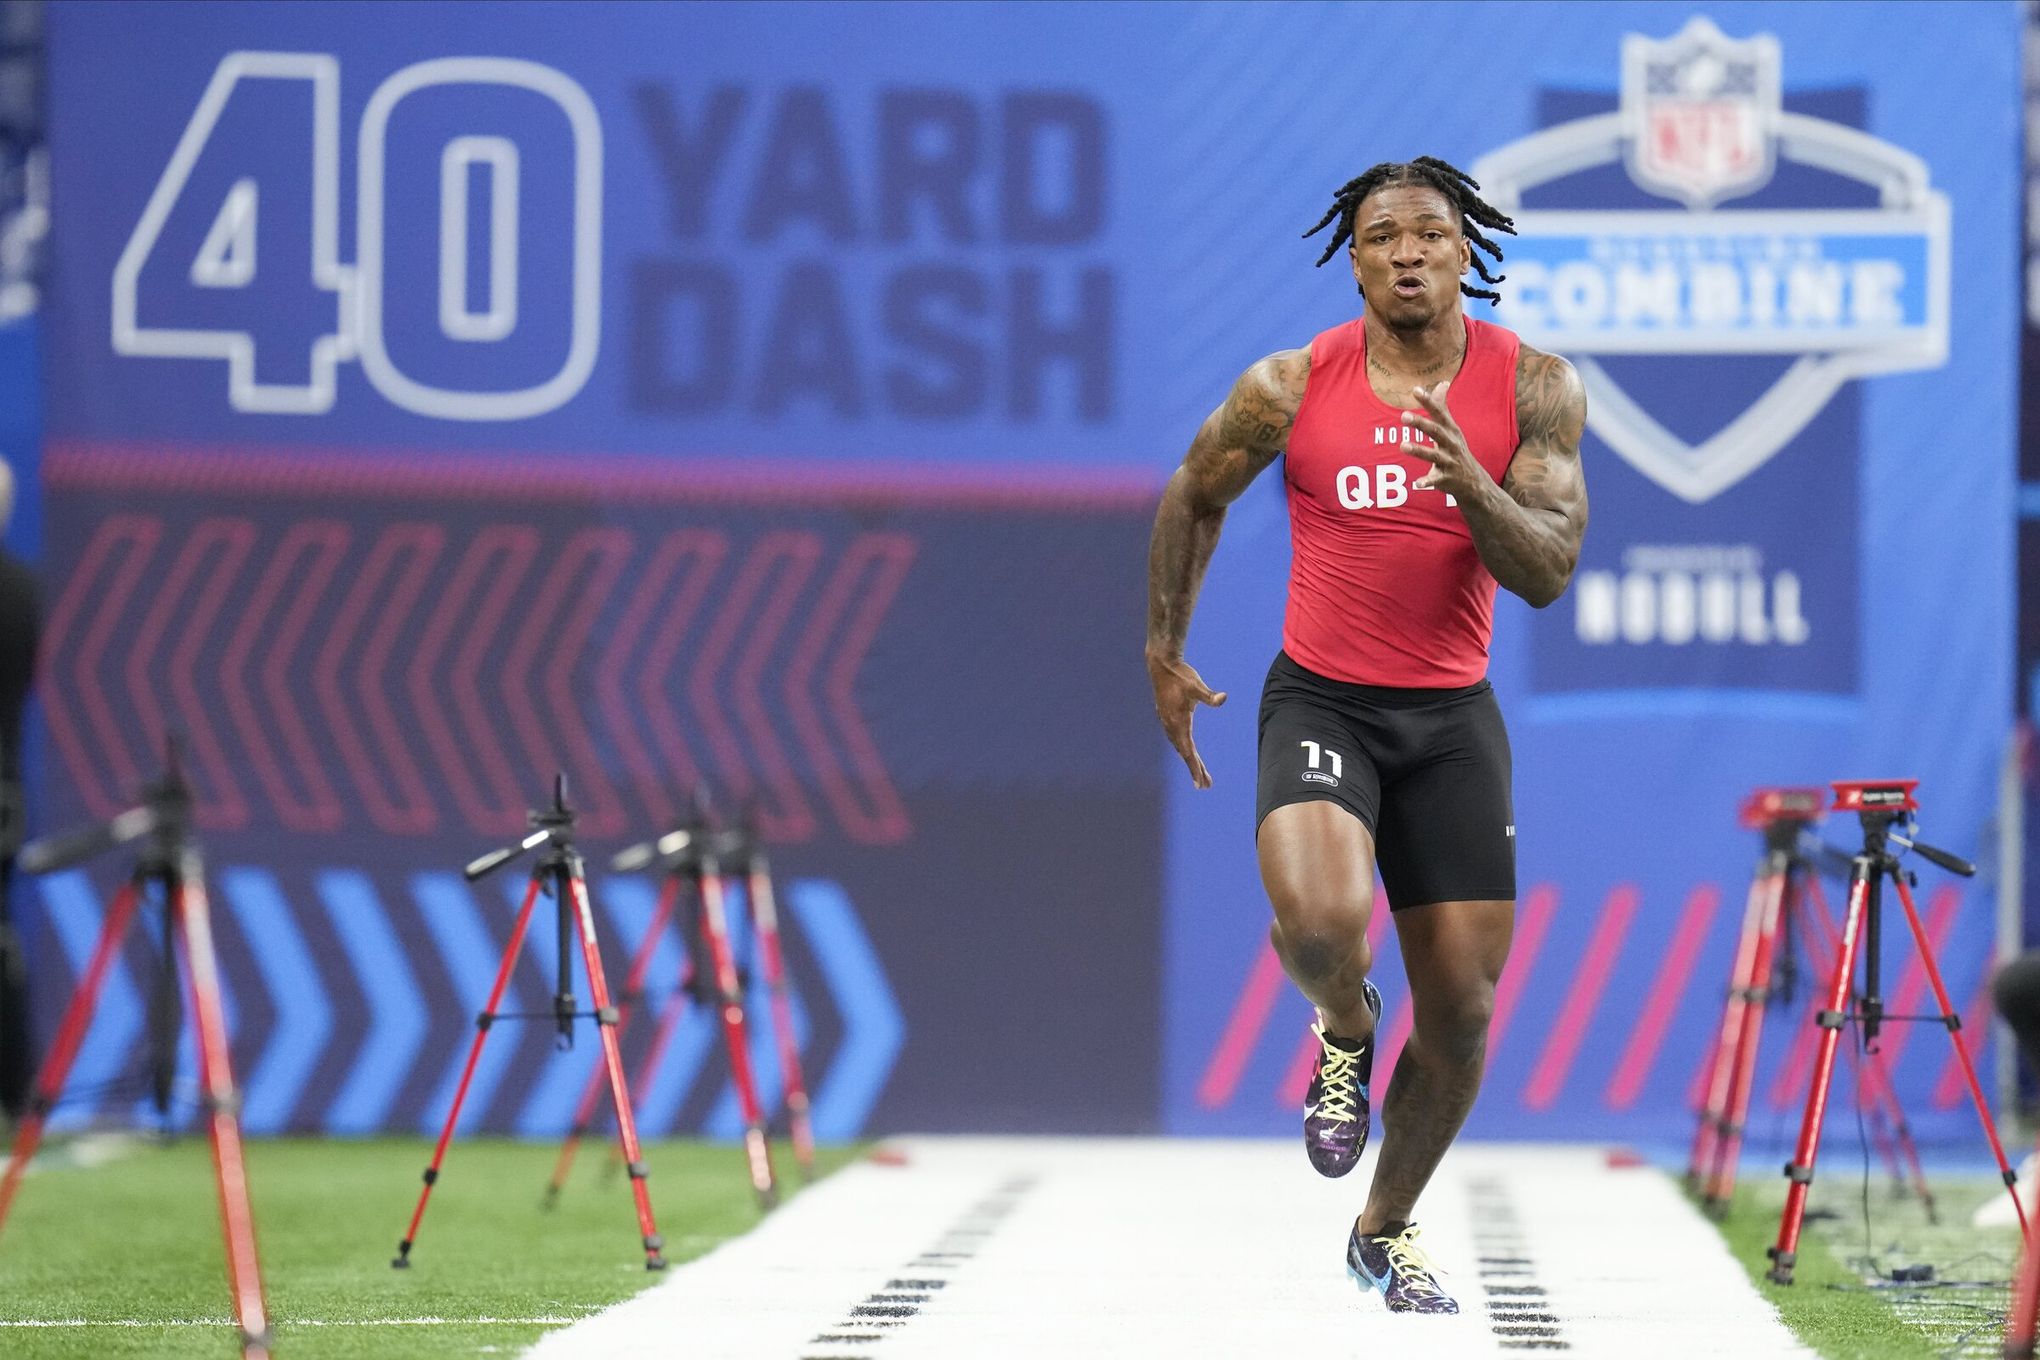 2023 NFL combine schedule: Draft workouts, interviews and how to